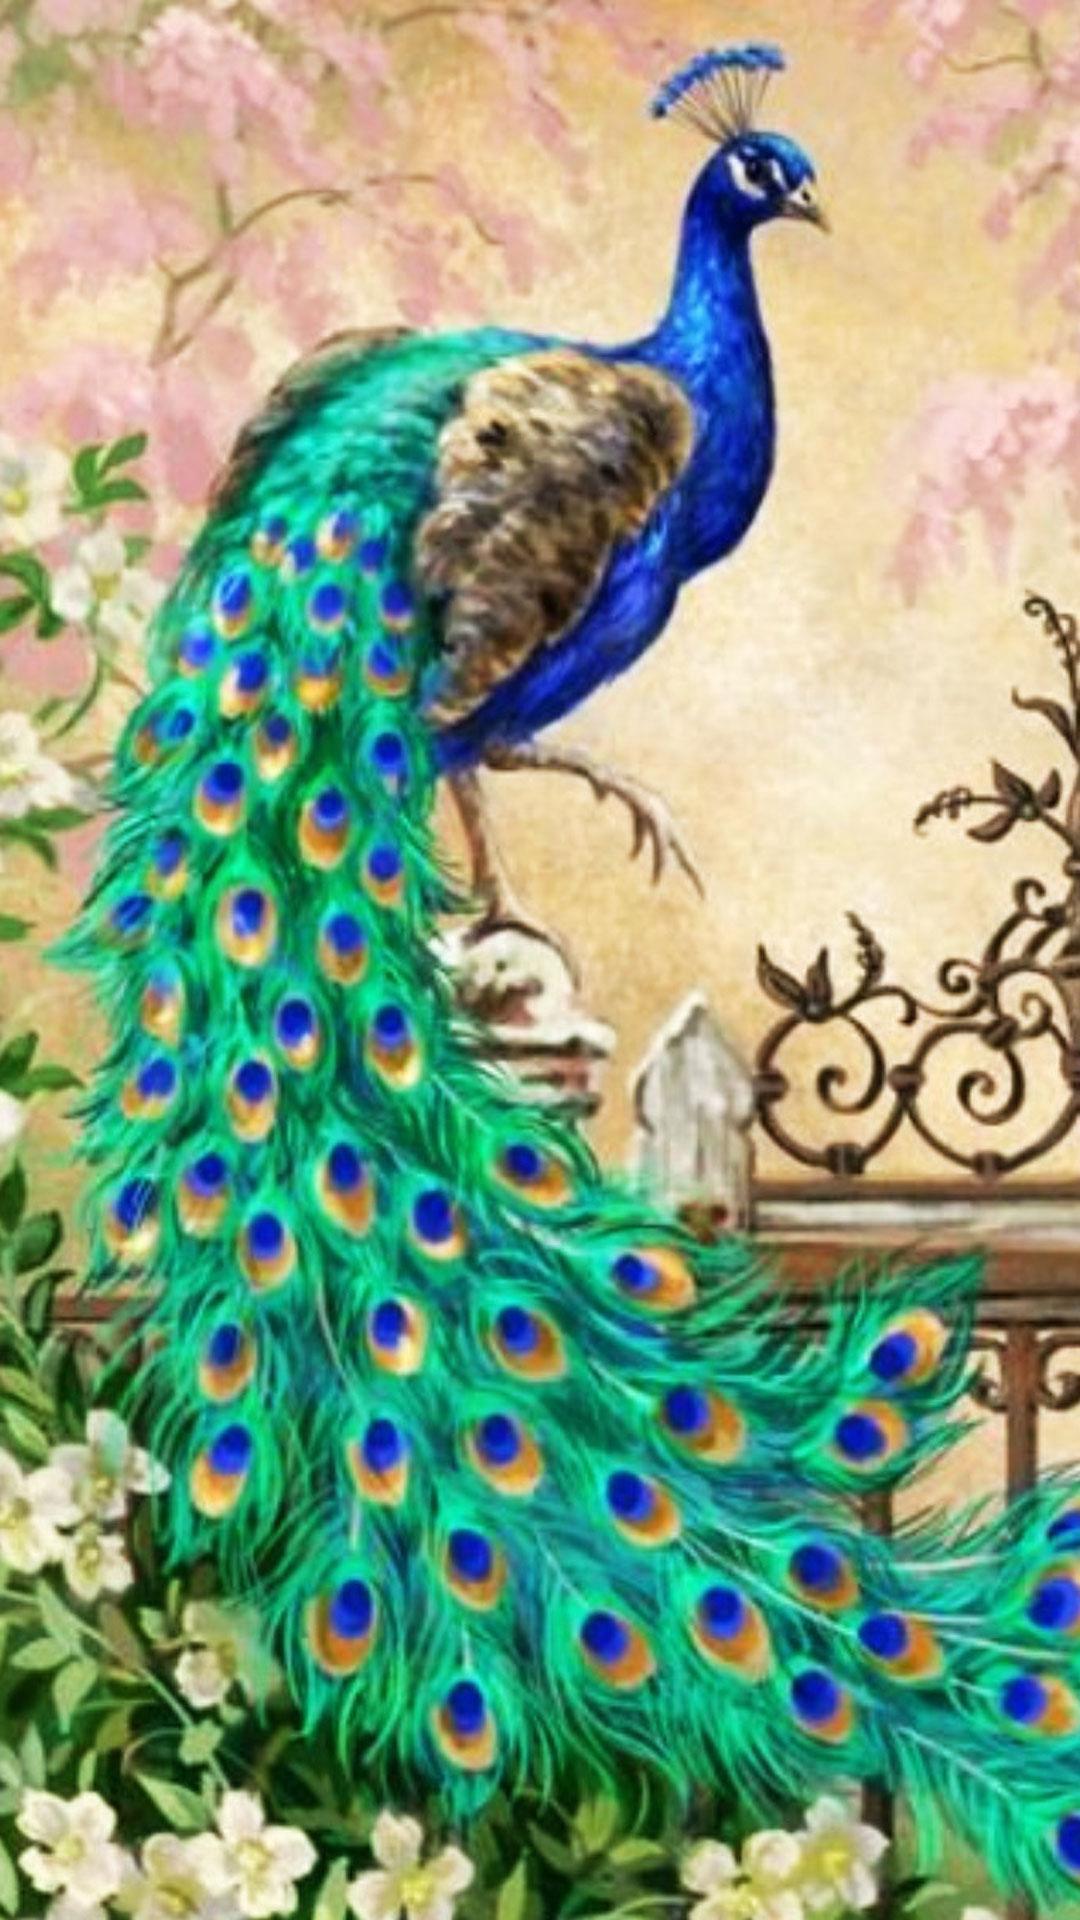 Peacock Live Wallpaper Picture of Peacocks for Android